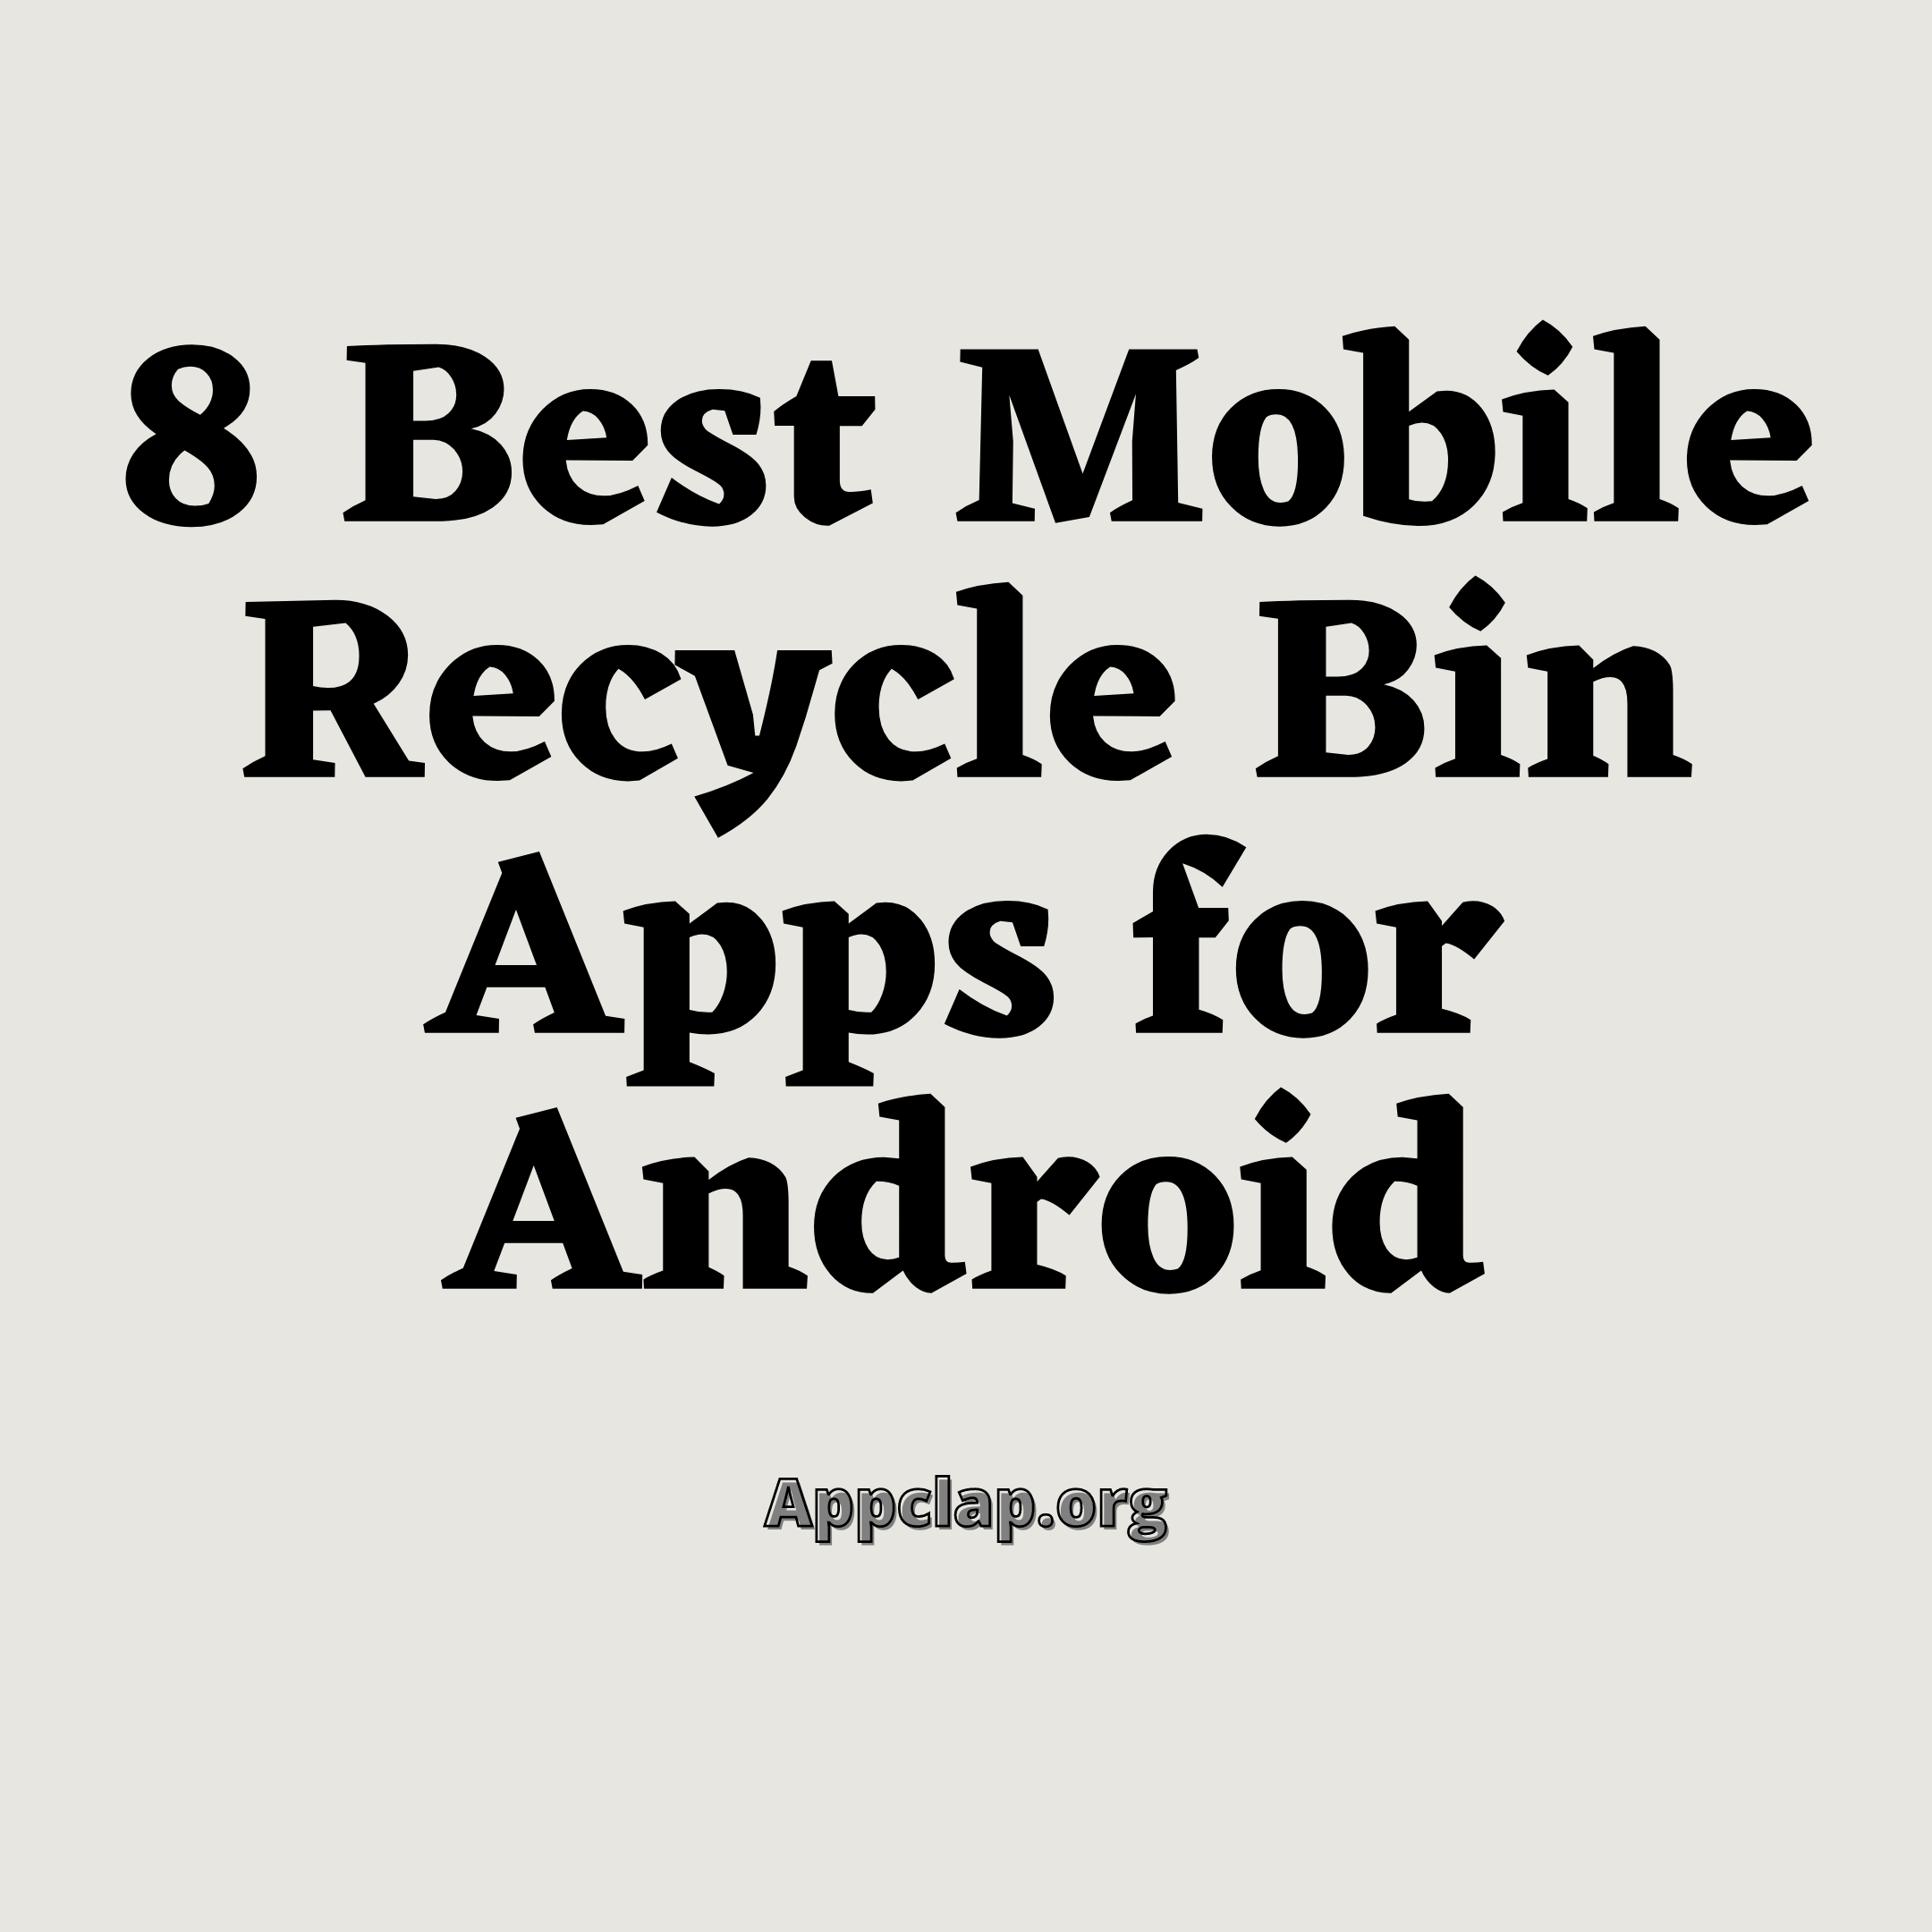 8 Best Mobile Recycle Bin Apps for Android